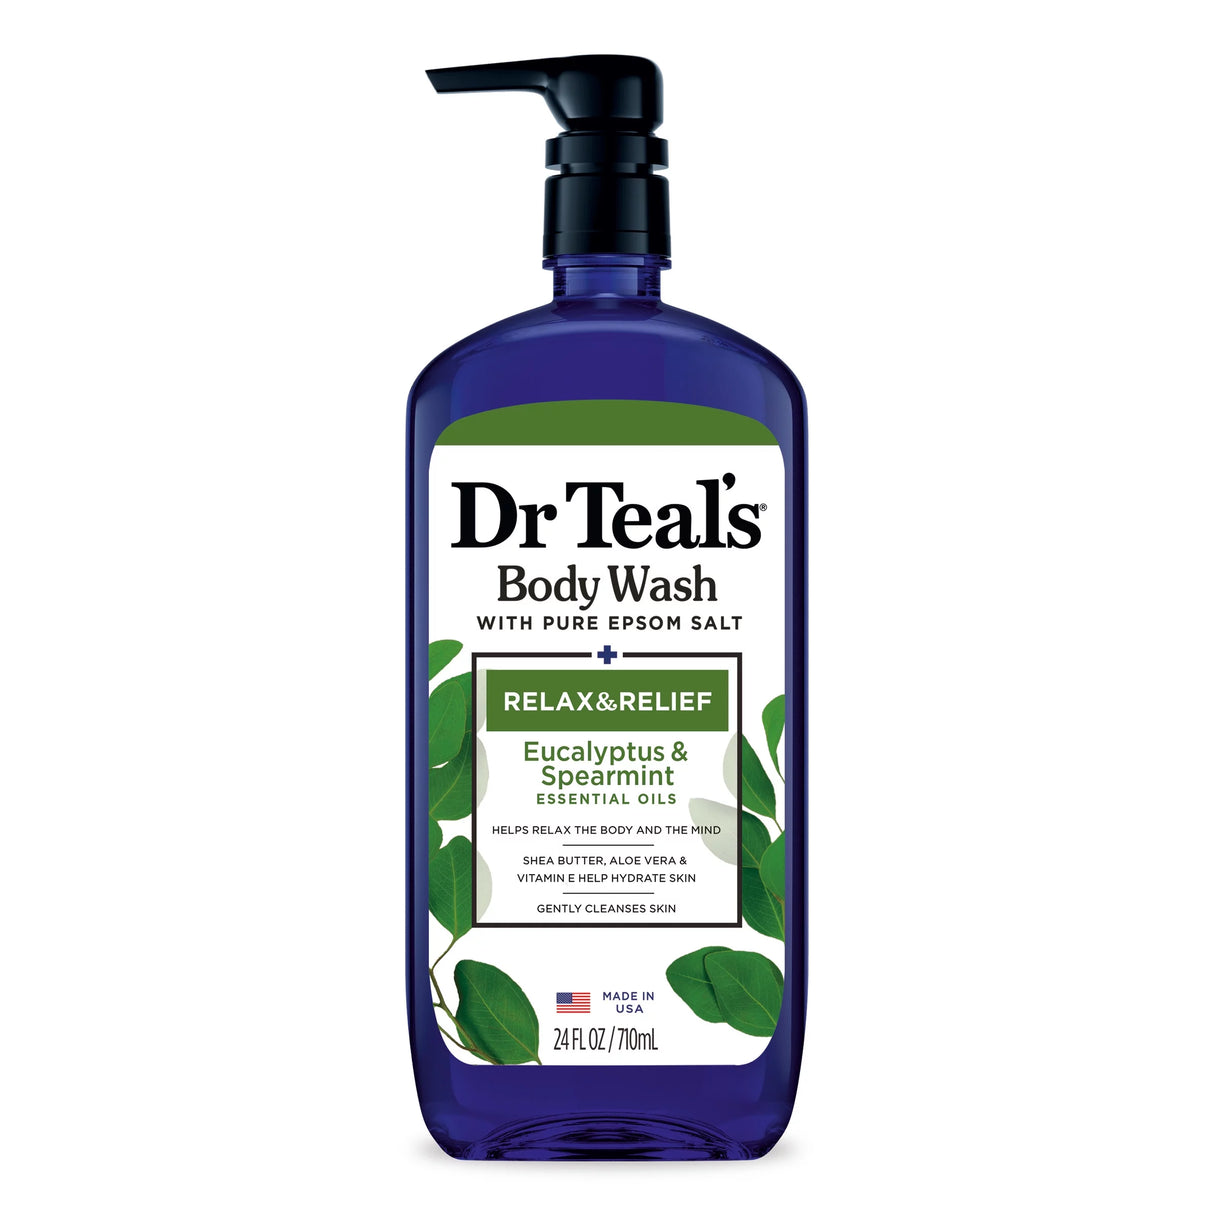 Dr Teal's Ultra Moisturizing Body Wash Relax and Relief with Eucalyptus Spearmint